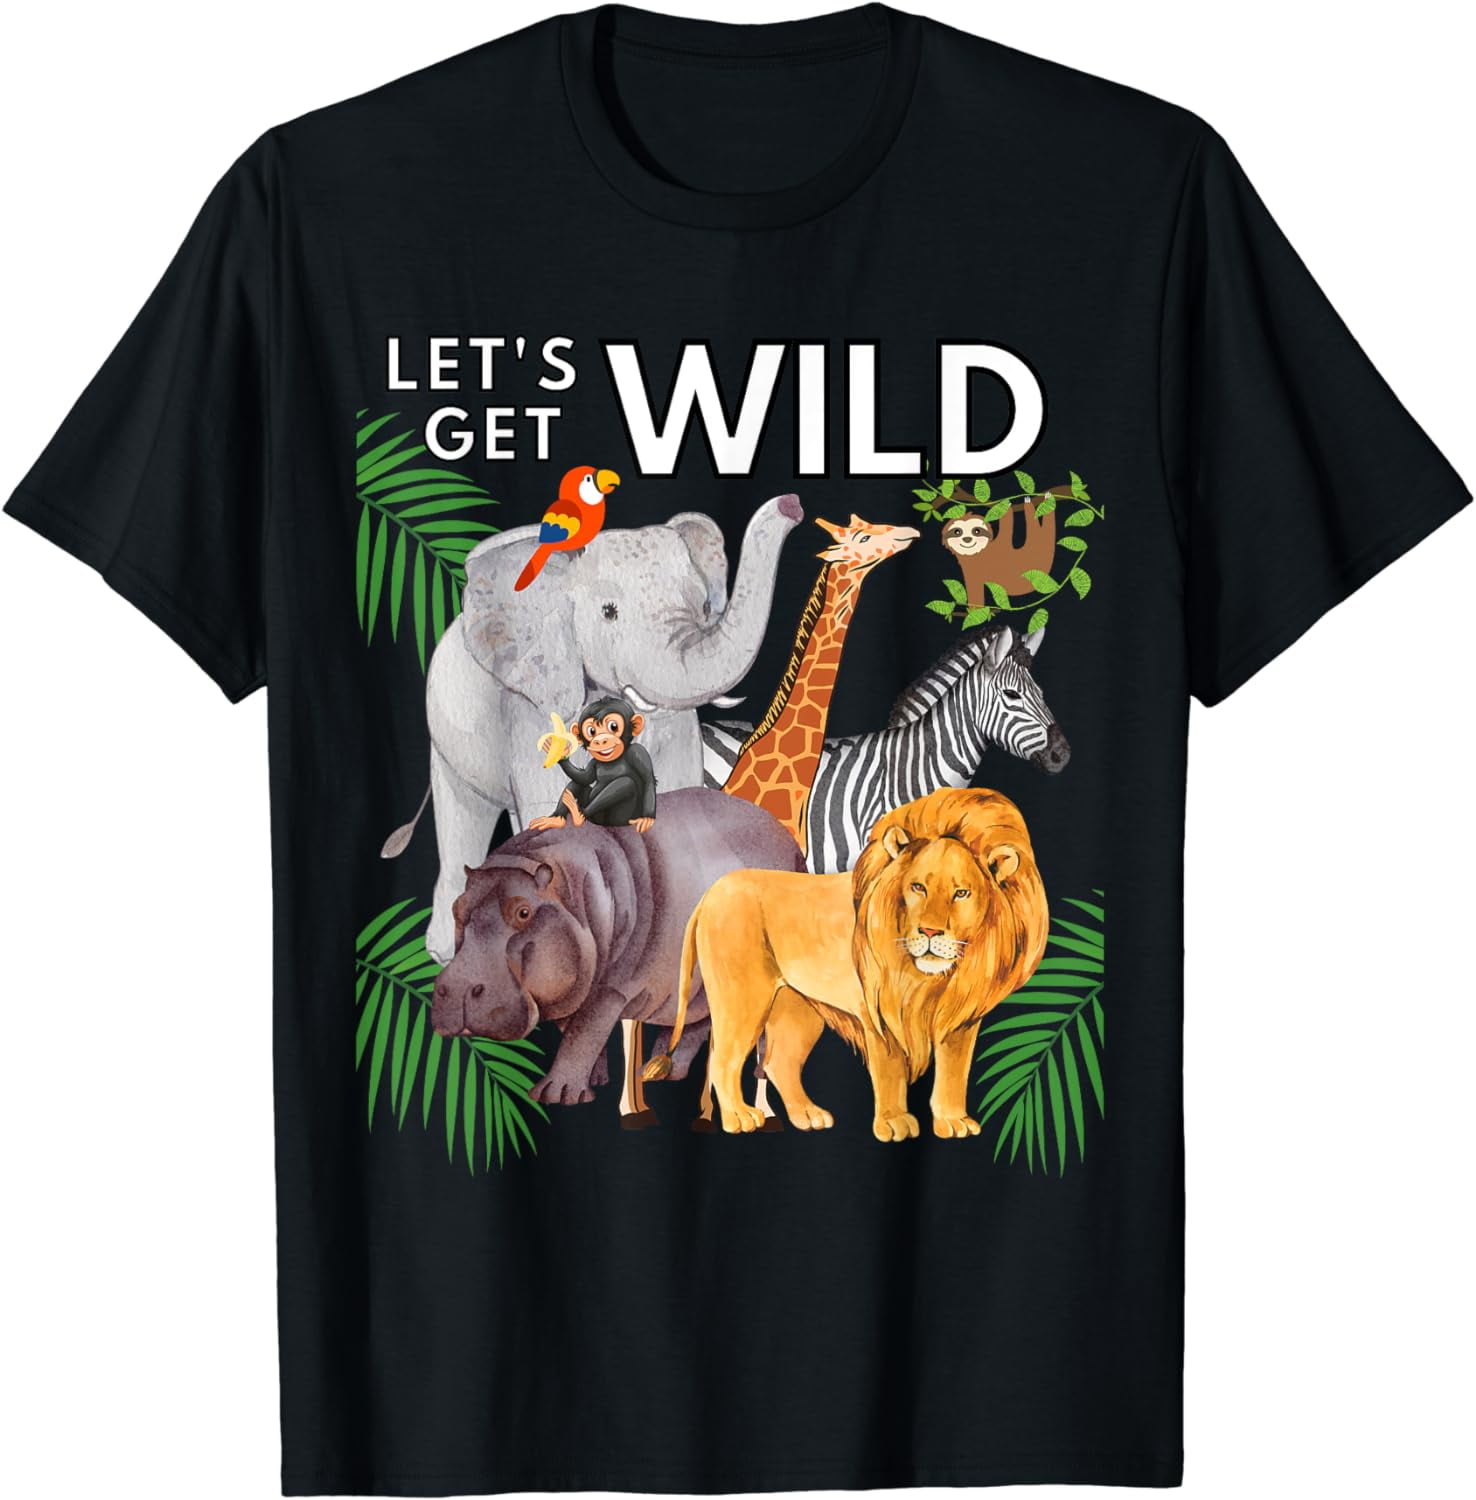 Let's Get Wild Animals Zoo Safari Party A Day At The Zoo T-Shirt ...